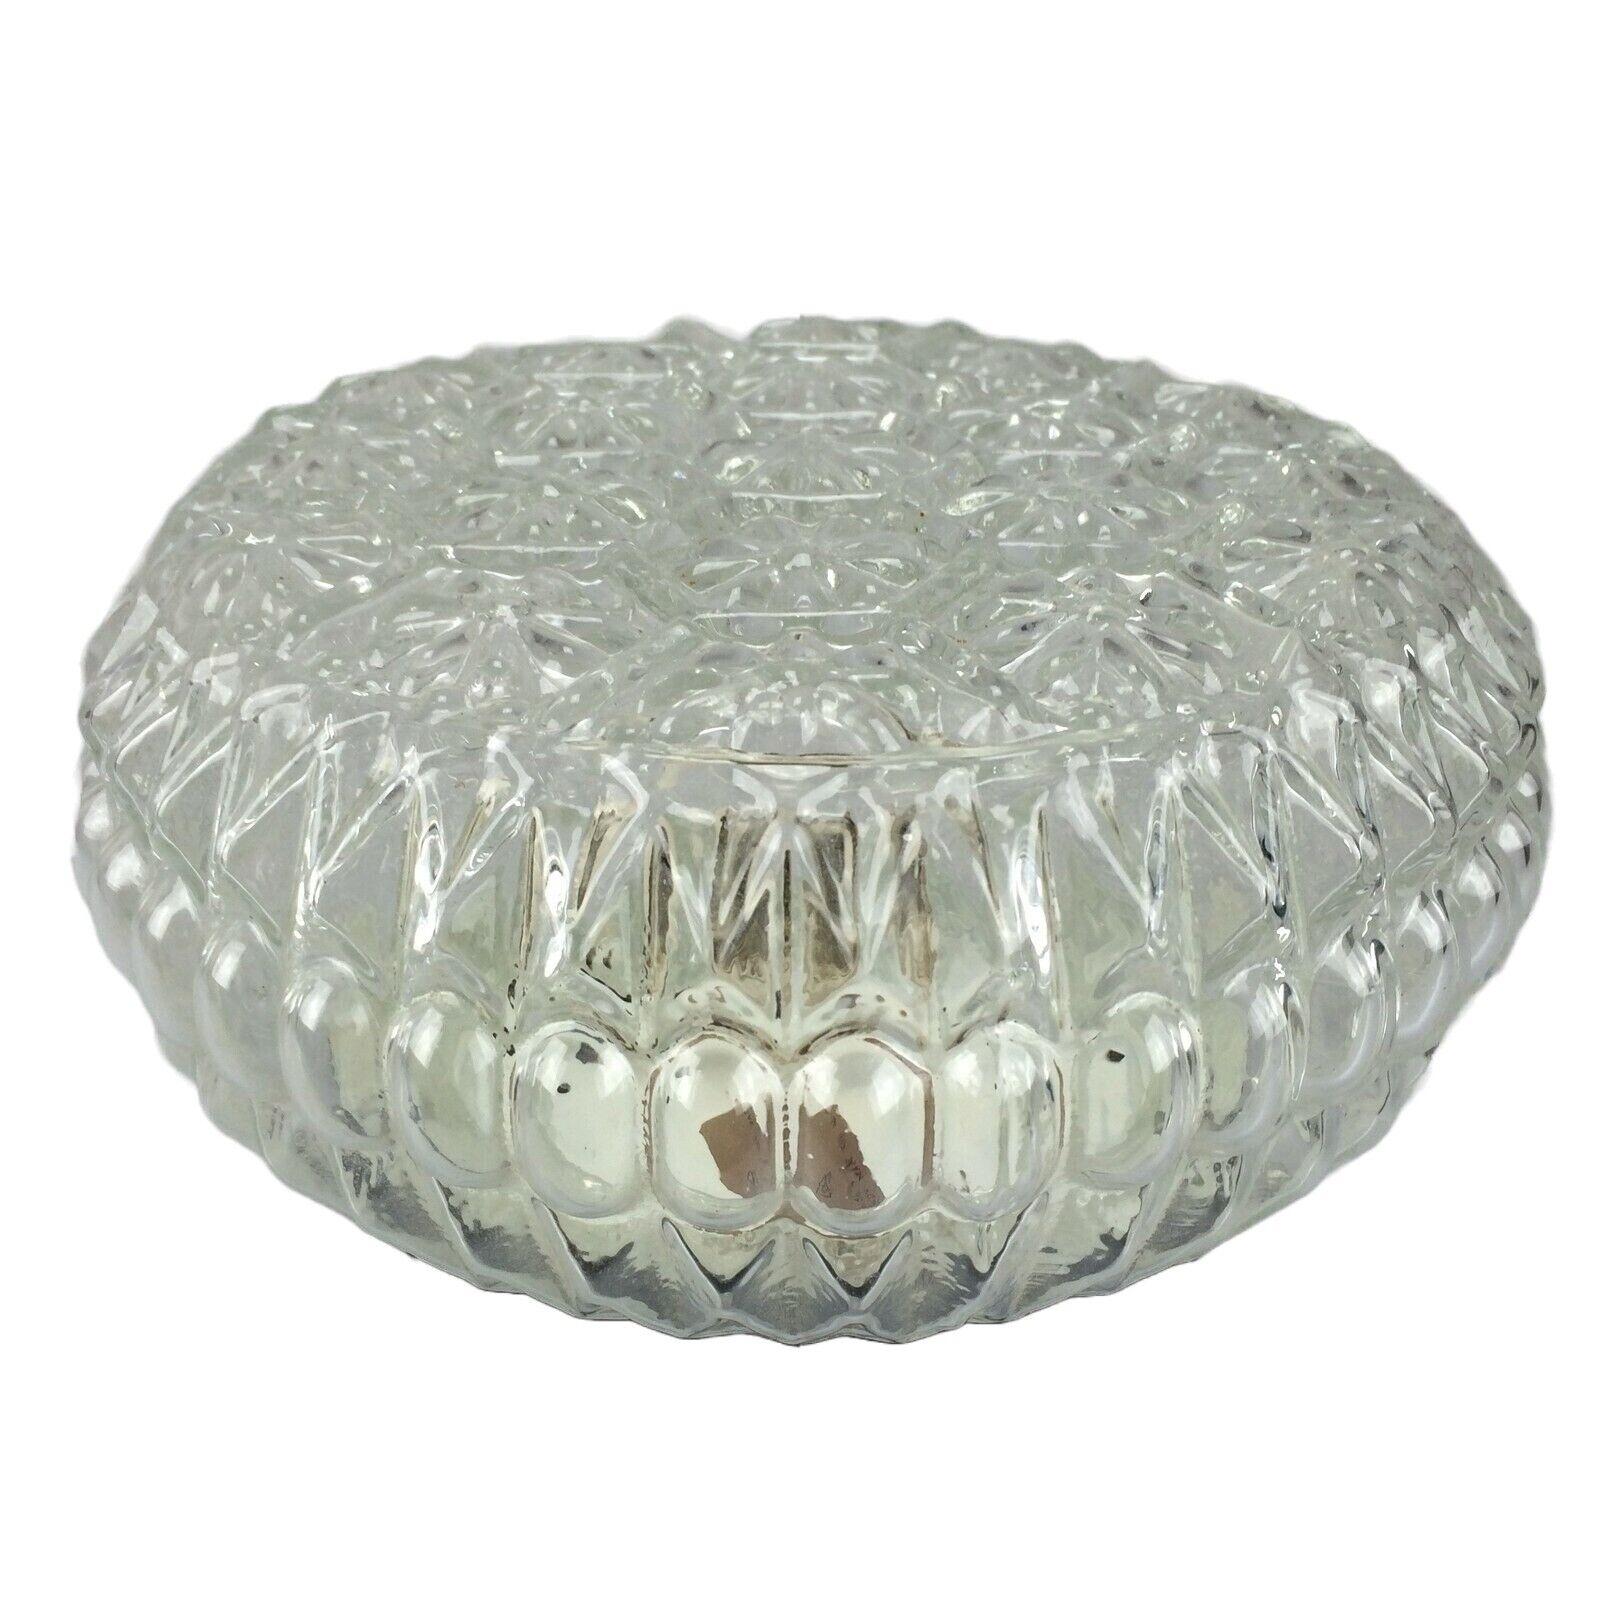 60s 70s Lamp luminaire plafoniere flush mount glass space age design

Object: plafoniere

Manufacturer:

Condition: good

Age: around 1960-1970

Dimensions:

Diameter = 19cm
Height = 10cm

Other notes:

The pictures serve as part of